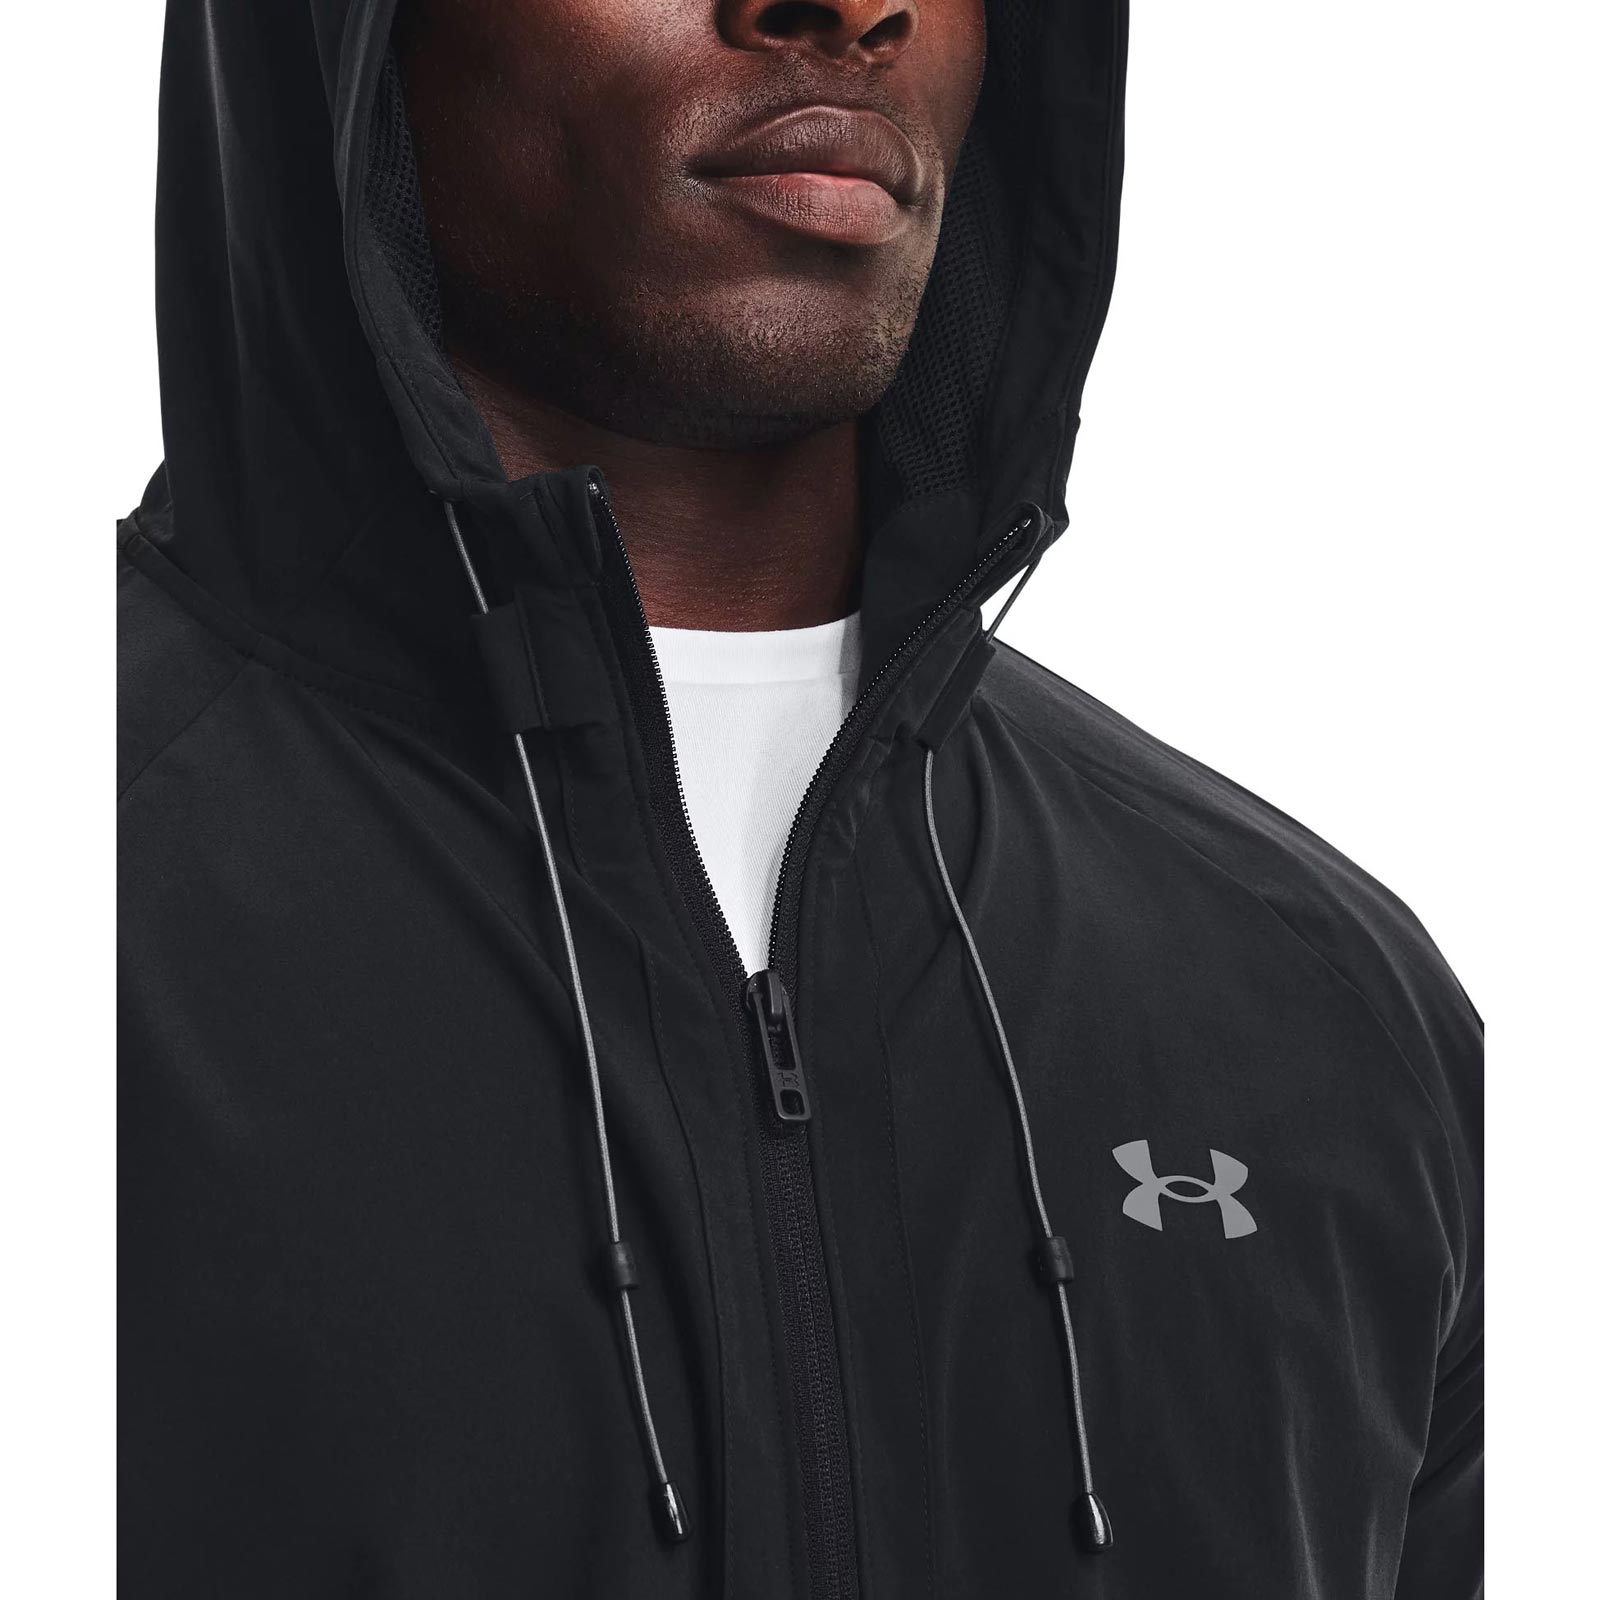 UNDER ARMOUR MENS STRETCH WOVEN WINDBREAKER